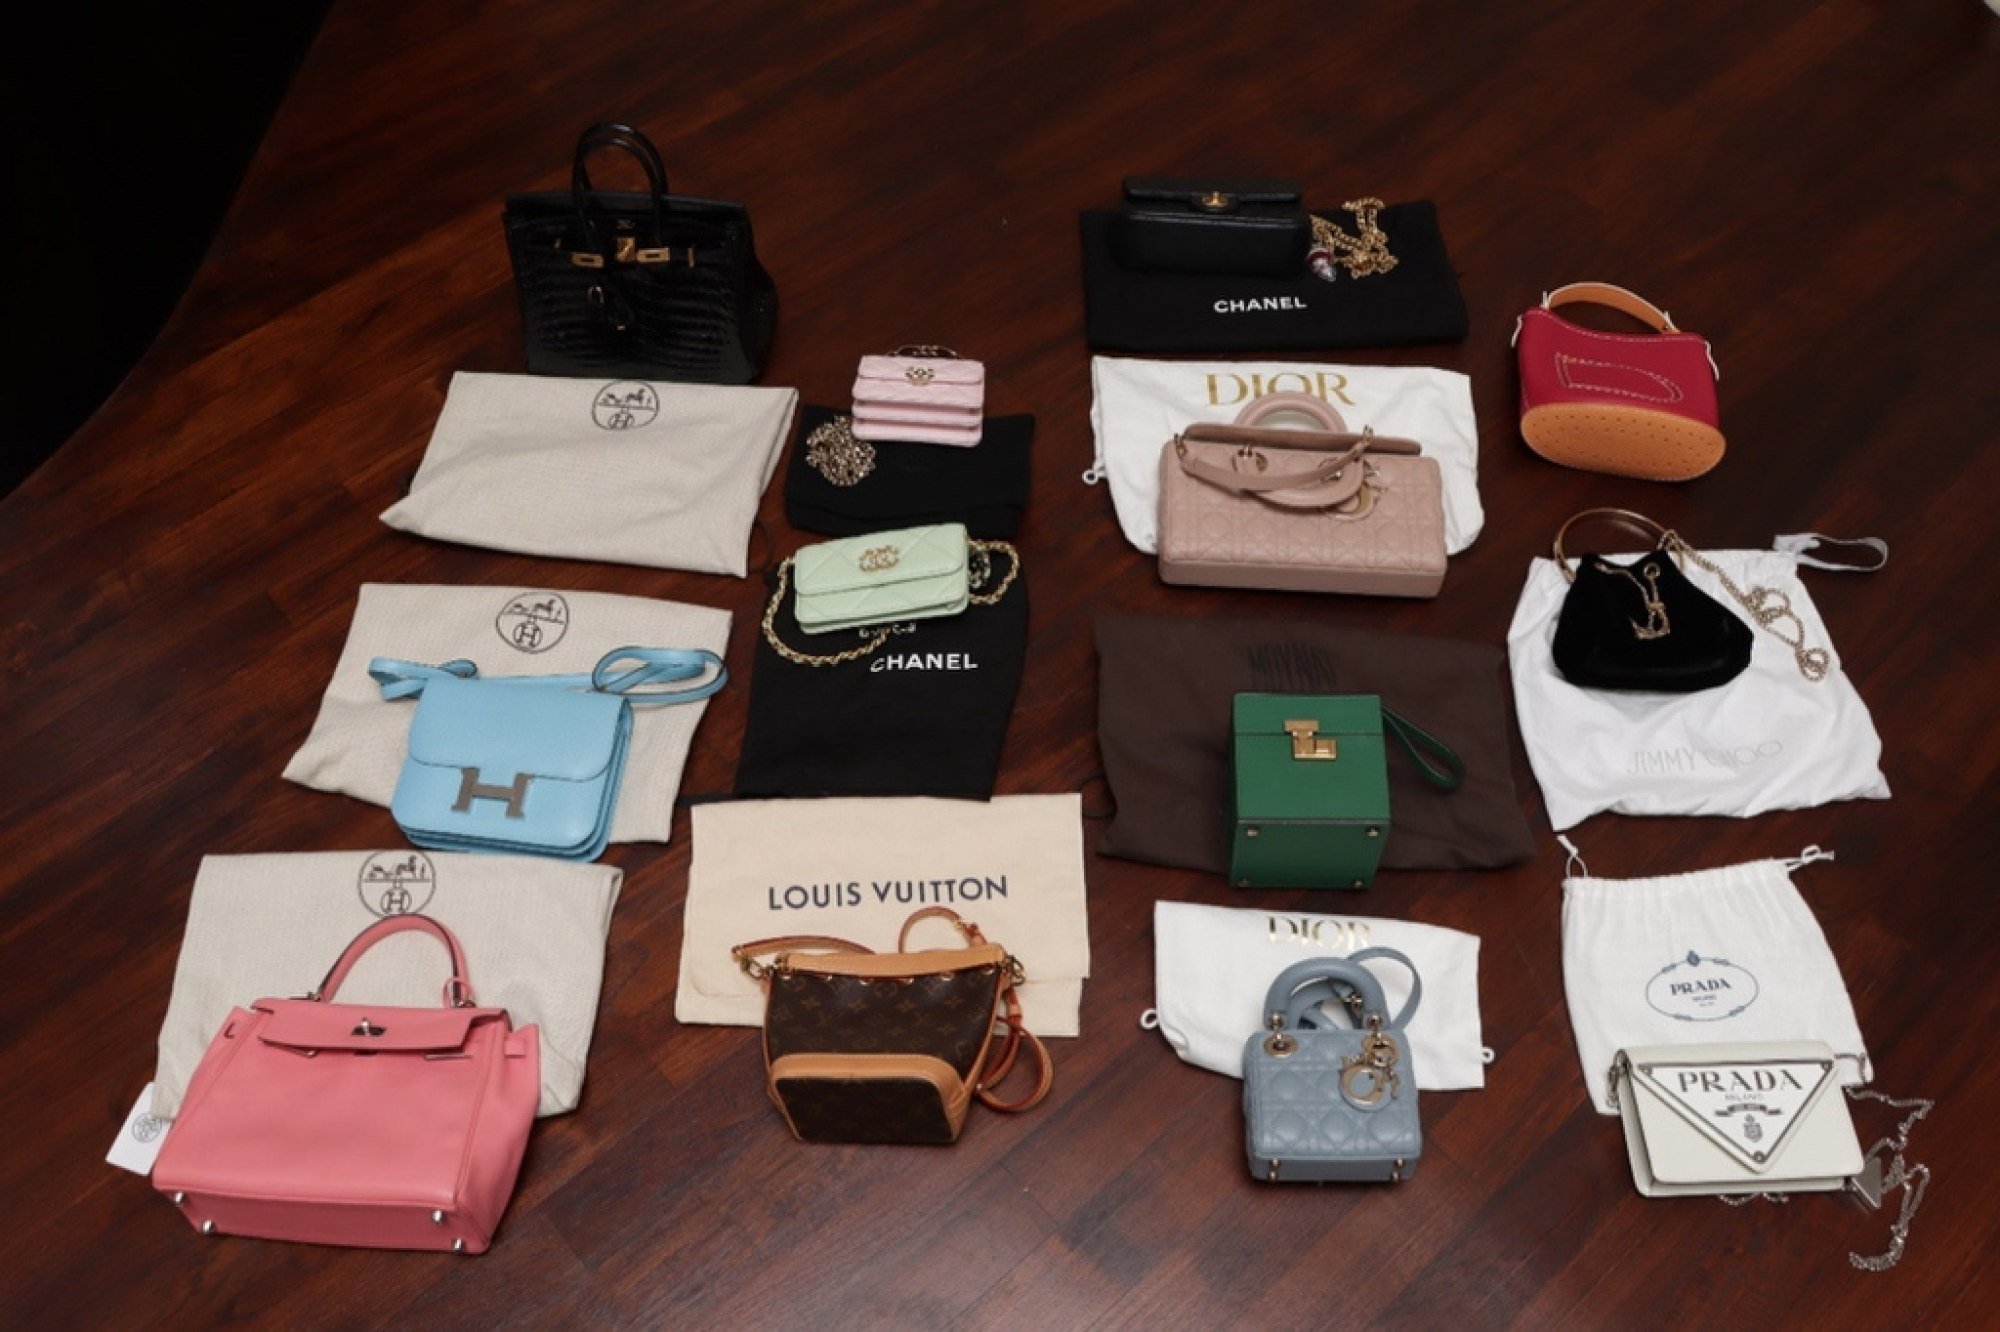 SELL HANDBAGS FOR CASH -WE BUY CHANEL LOUIS VUITTON CHANEL DIOR